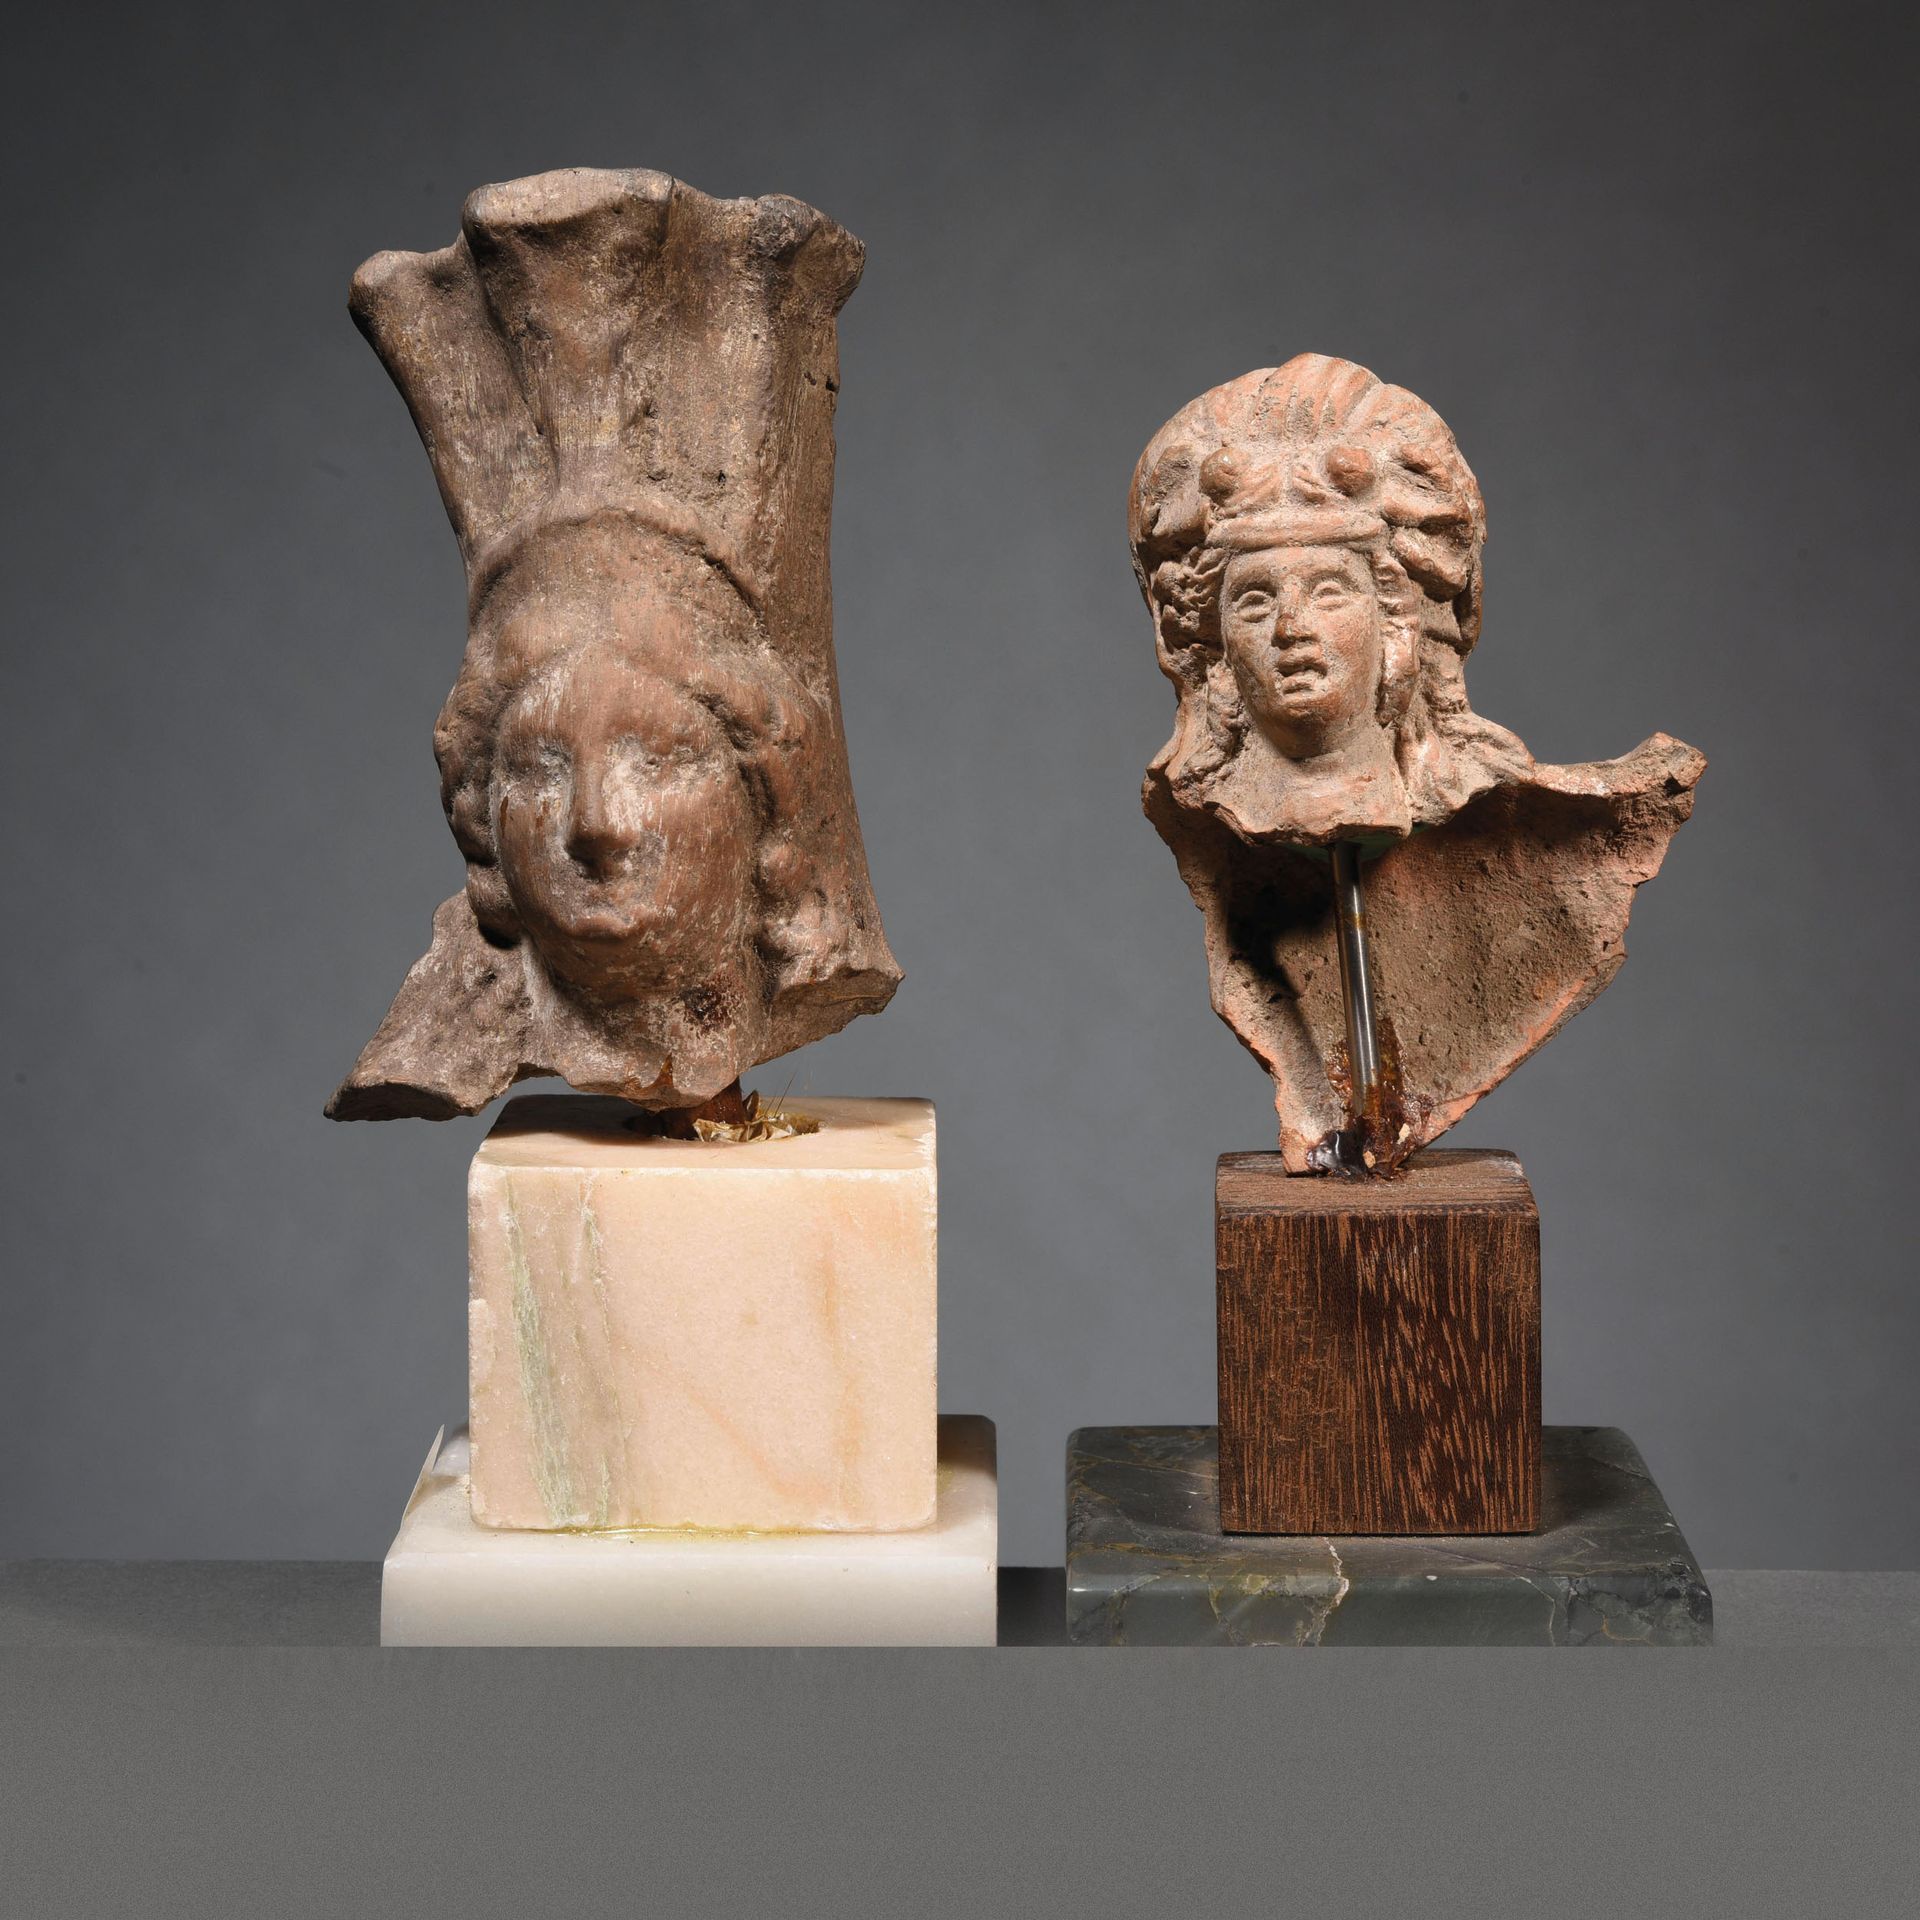 Null LOT OF 2 HEADS OF GODS

Hellenistic art

In terracotta 



Provenance

Form&hellip;